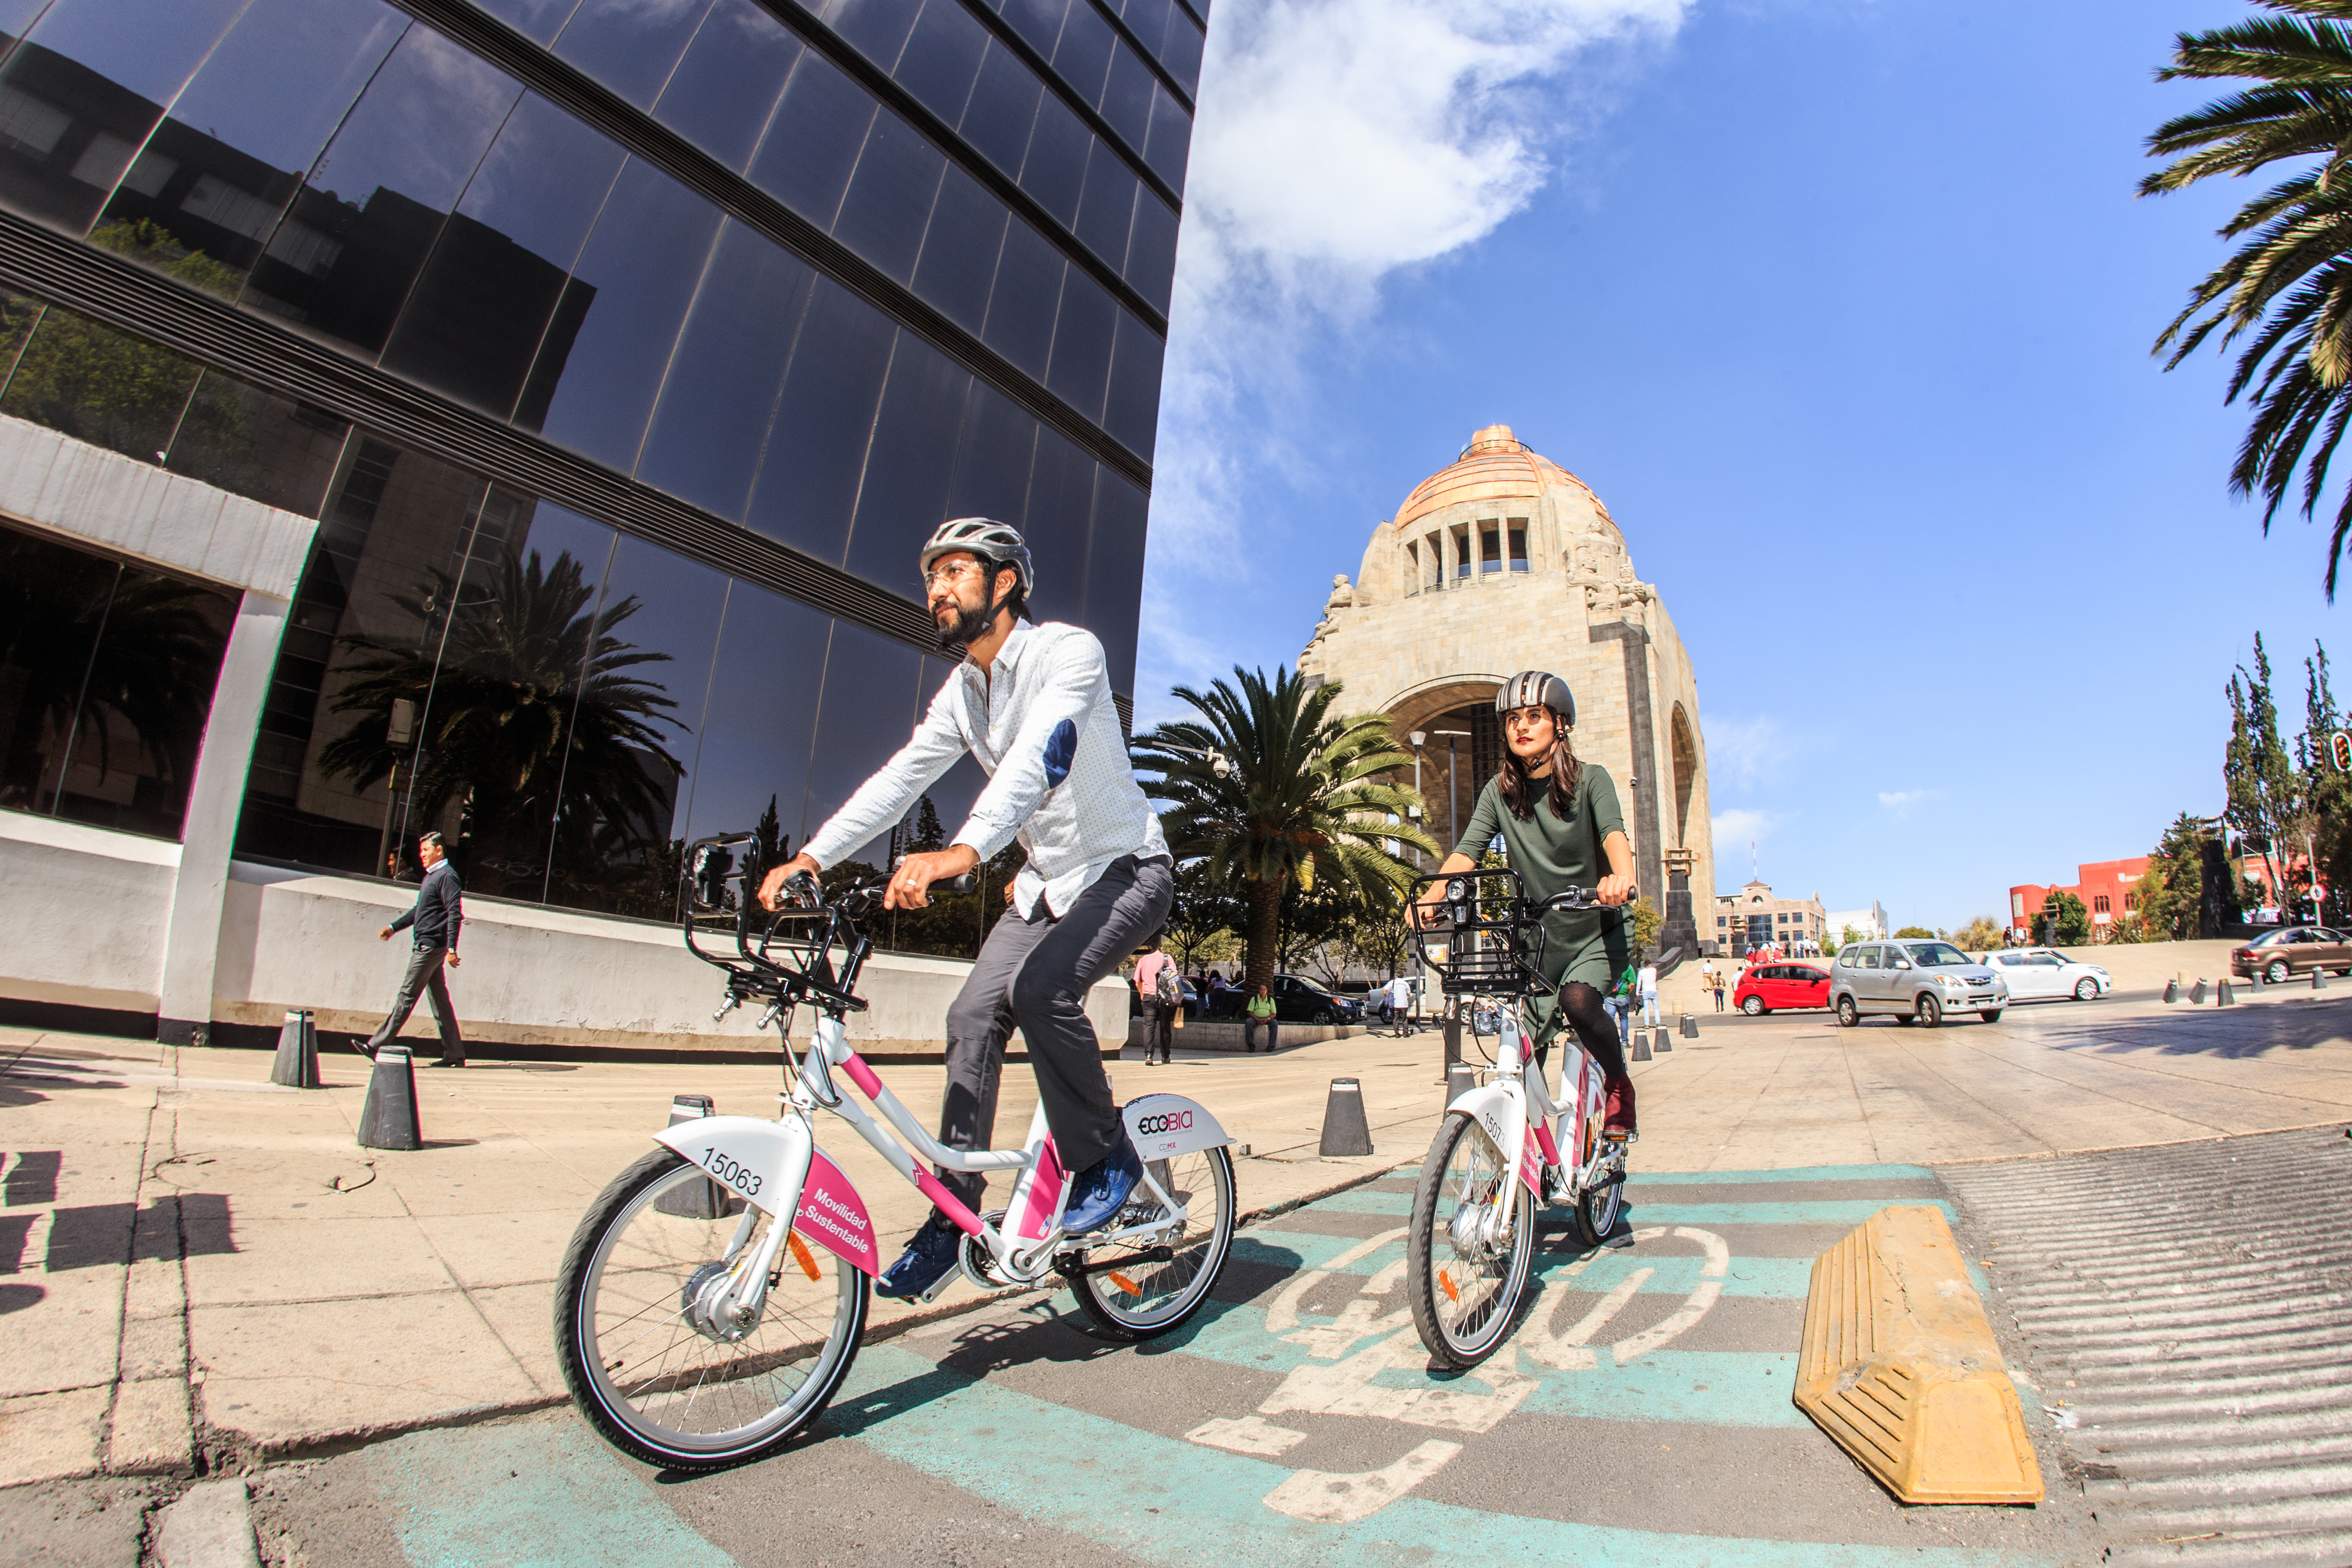 New ITDP Report Helps Cities “Plug” E-bikes and E-scooters into their Transport Networks